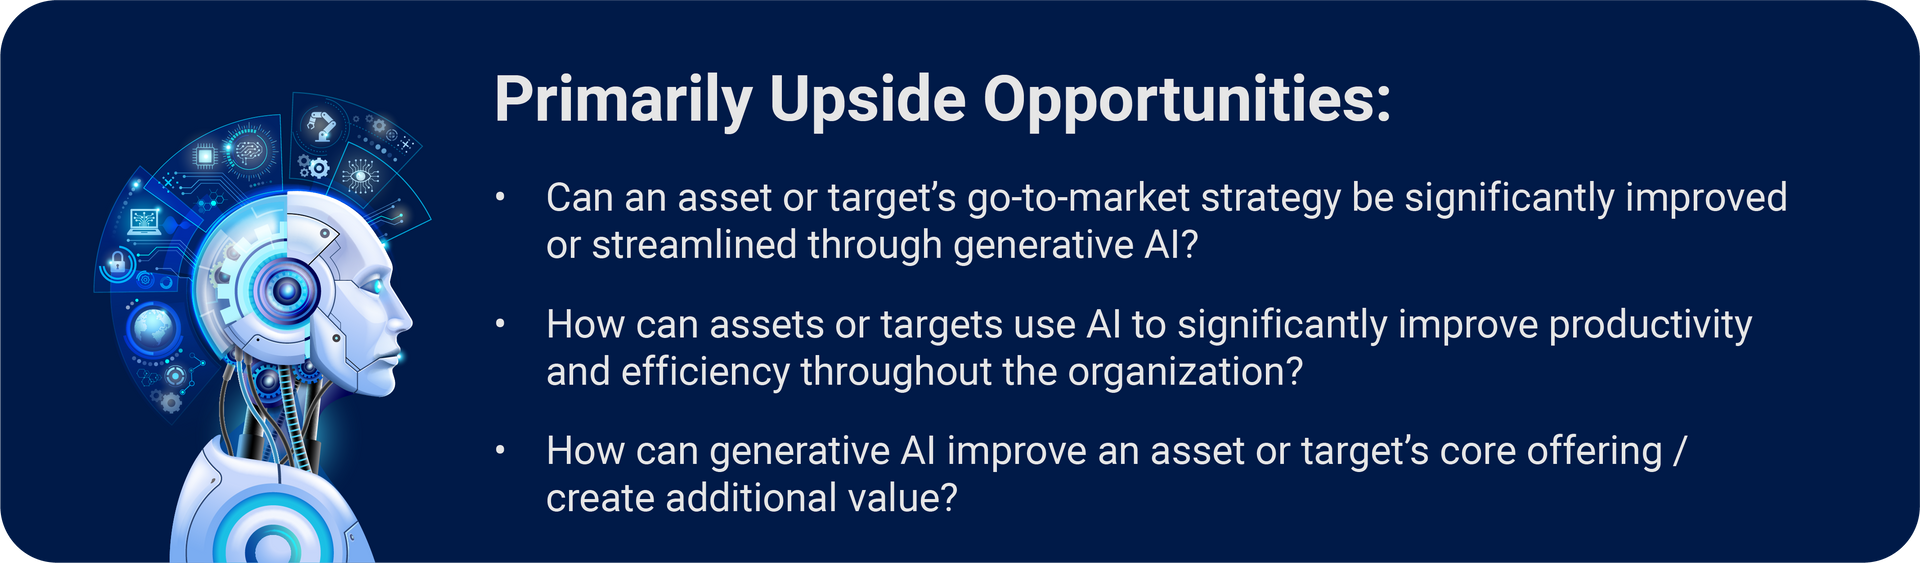 AI-driven shifts in core value propositions have the potential to create new winners and losers across markets and verticals: Upside opportunities for PE to consider: (1) Can an asset or target’s go-to-market strategy be significantly improved or streamlined through generative AI? (2) How can an asset or target use AI to significantly improve productivity and efficiency throughout the organization? (3) How can generative AI improve an asset or target’s core offering / create additional value?